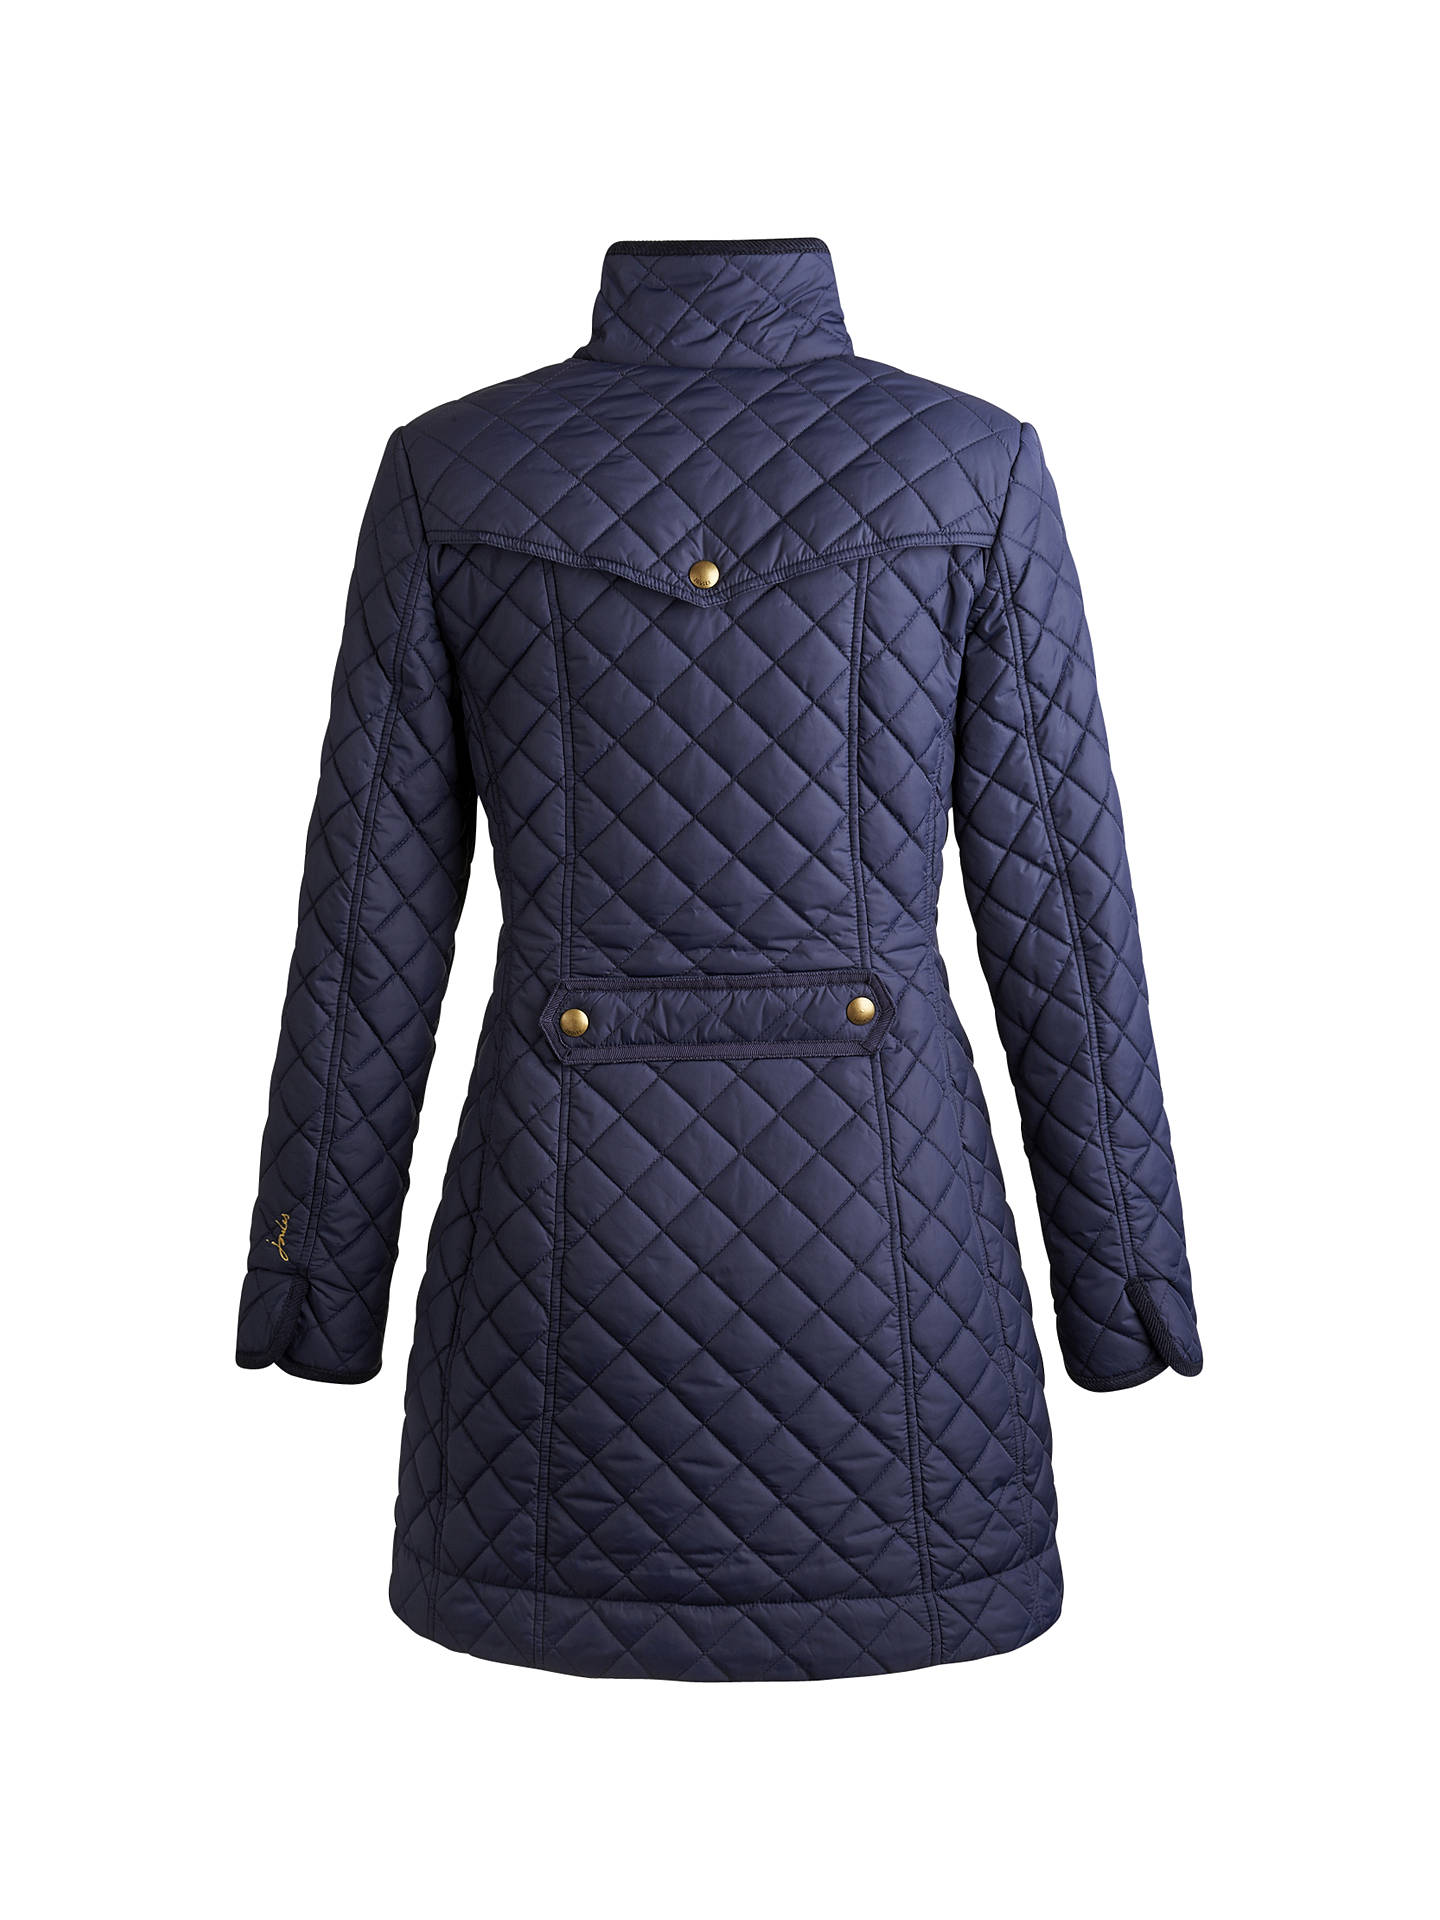 Joules Fairhurst Quilted Jacket, Navy at John Lewis & Partners